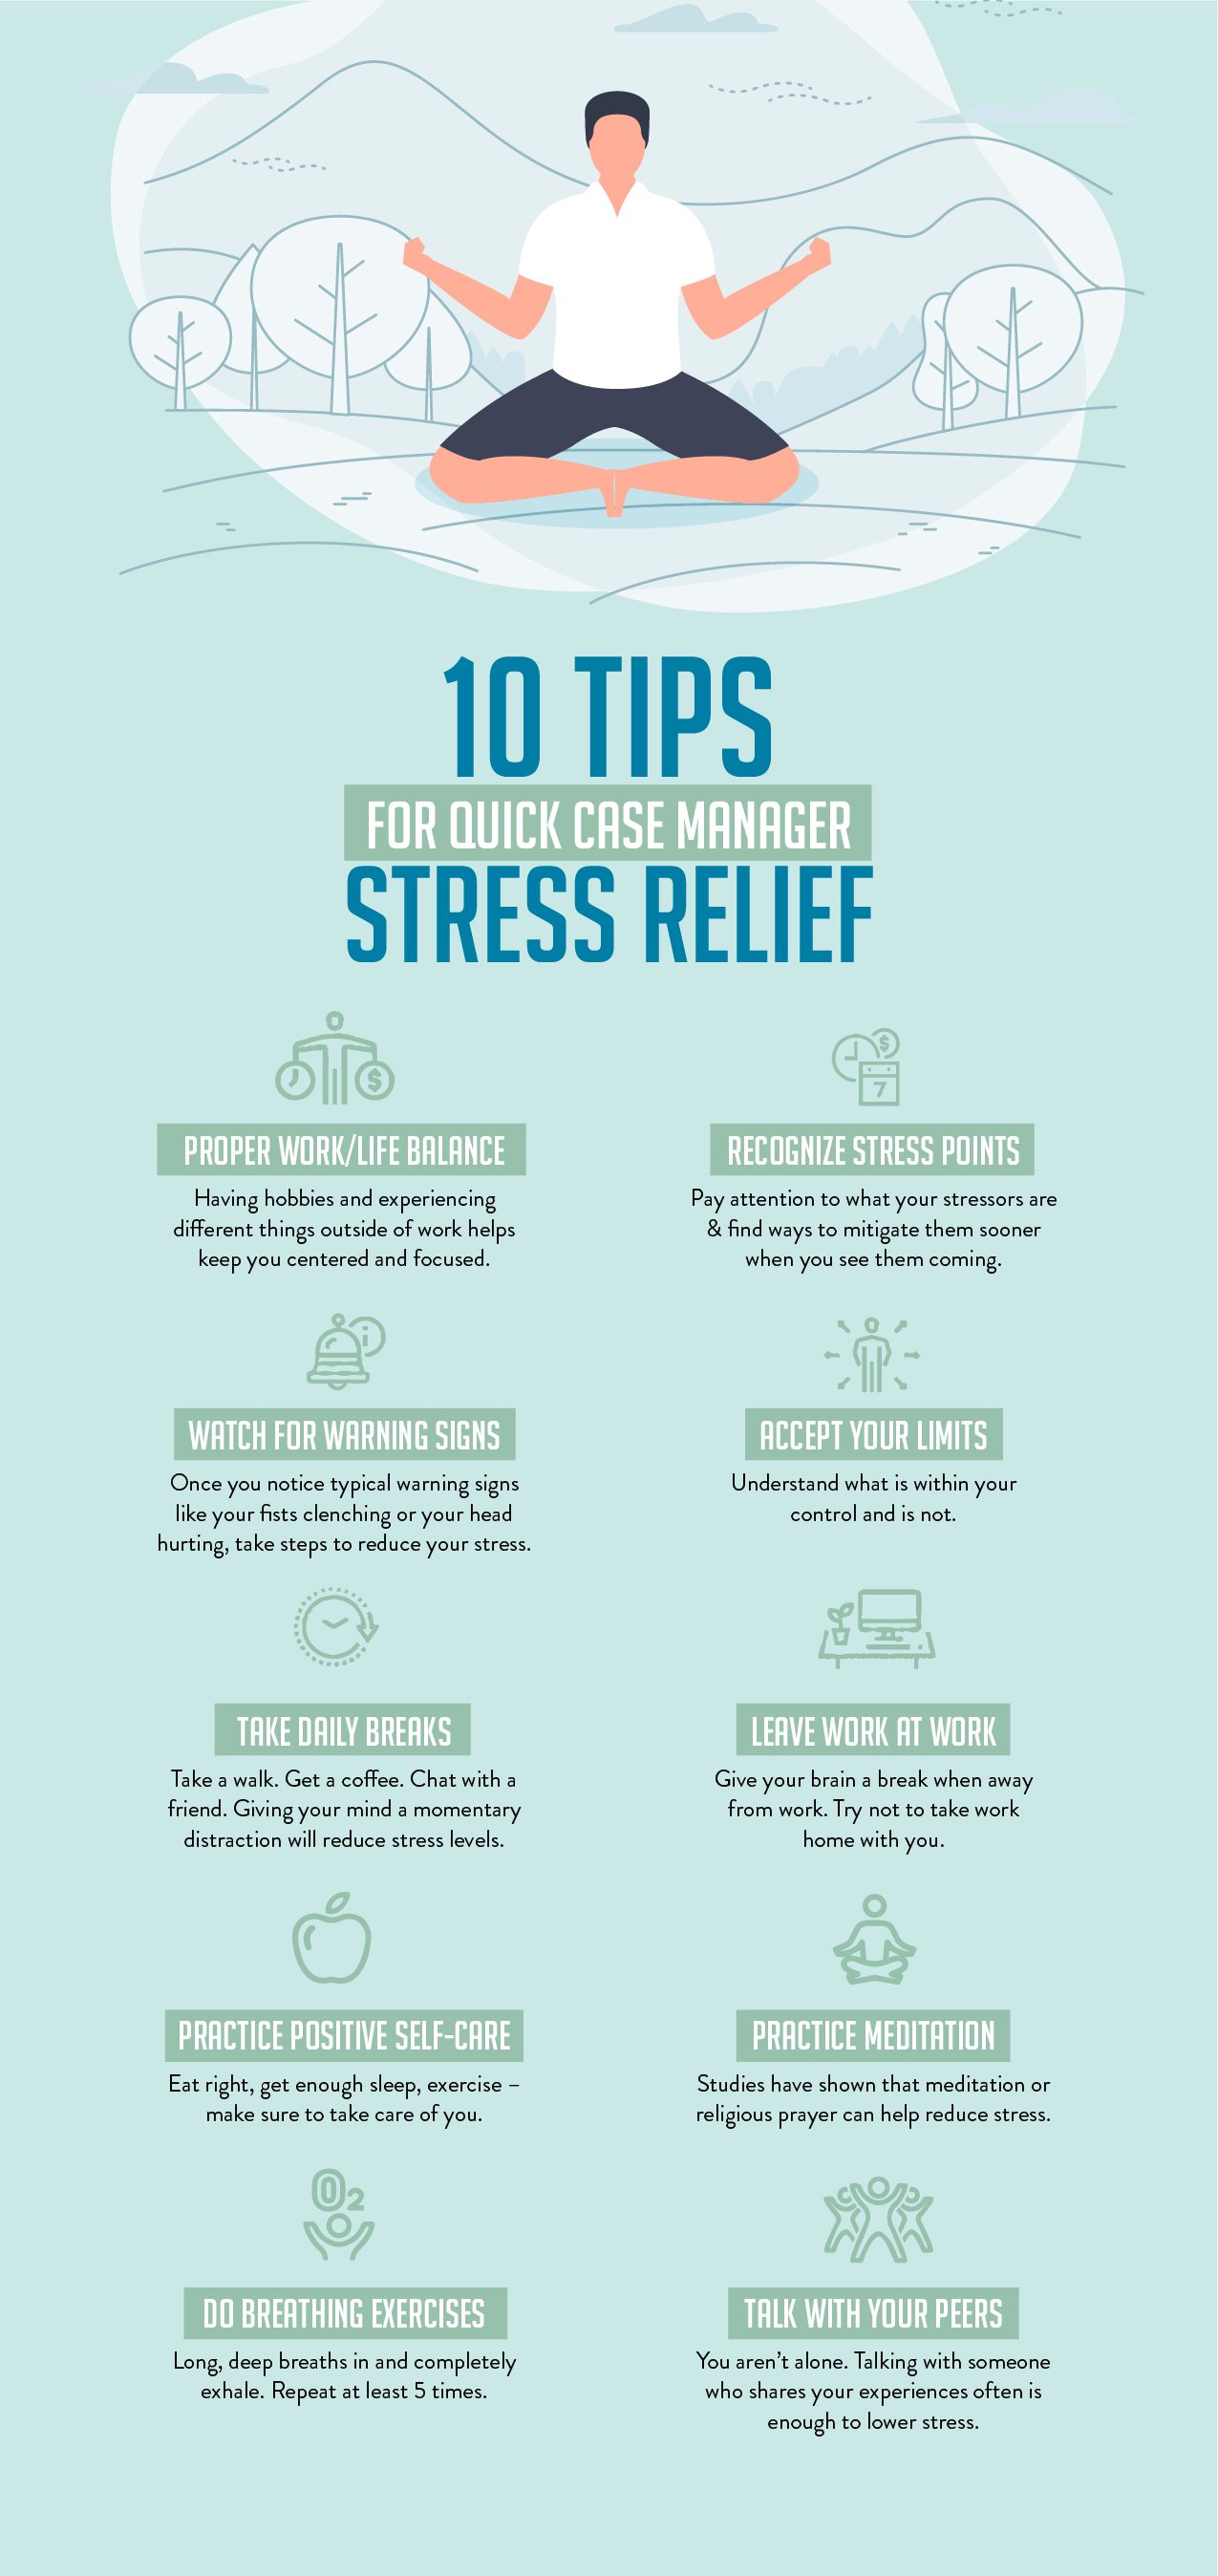 Stress relief tips